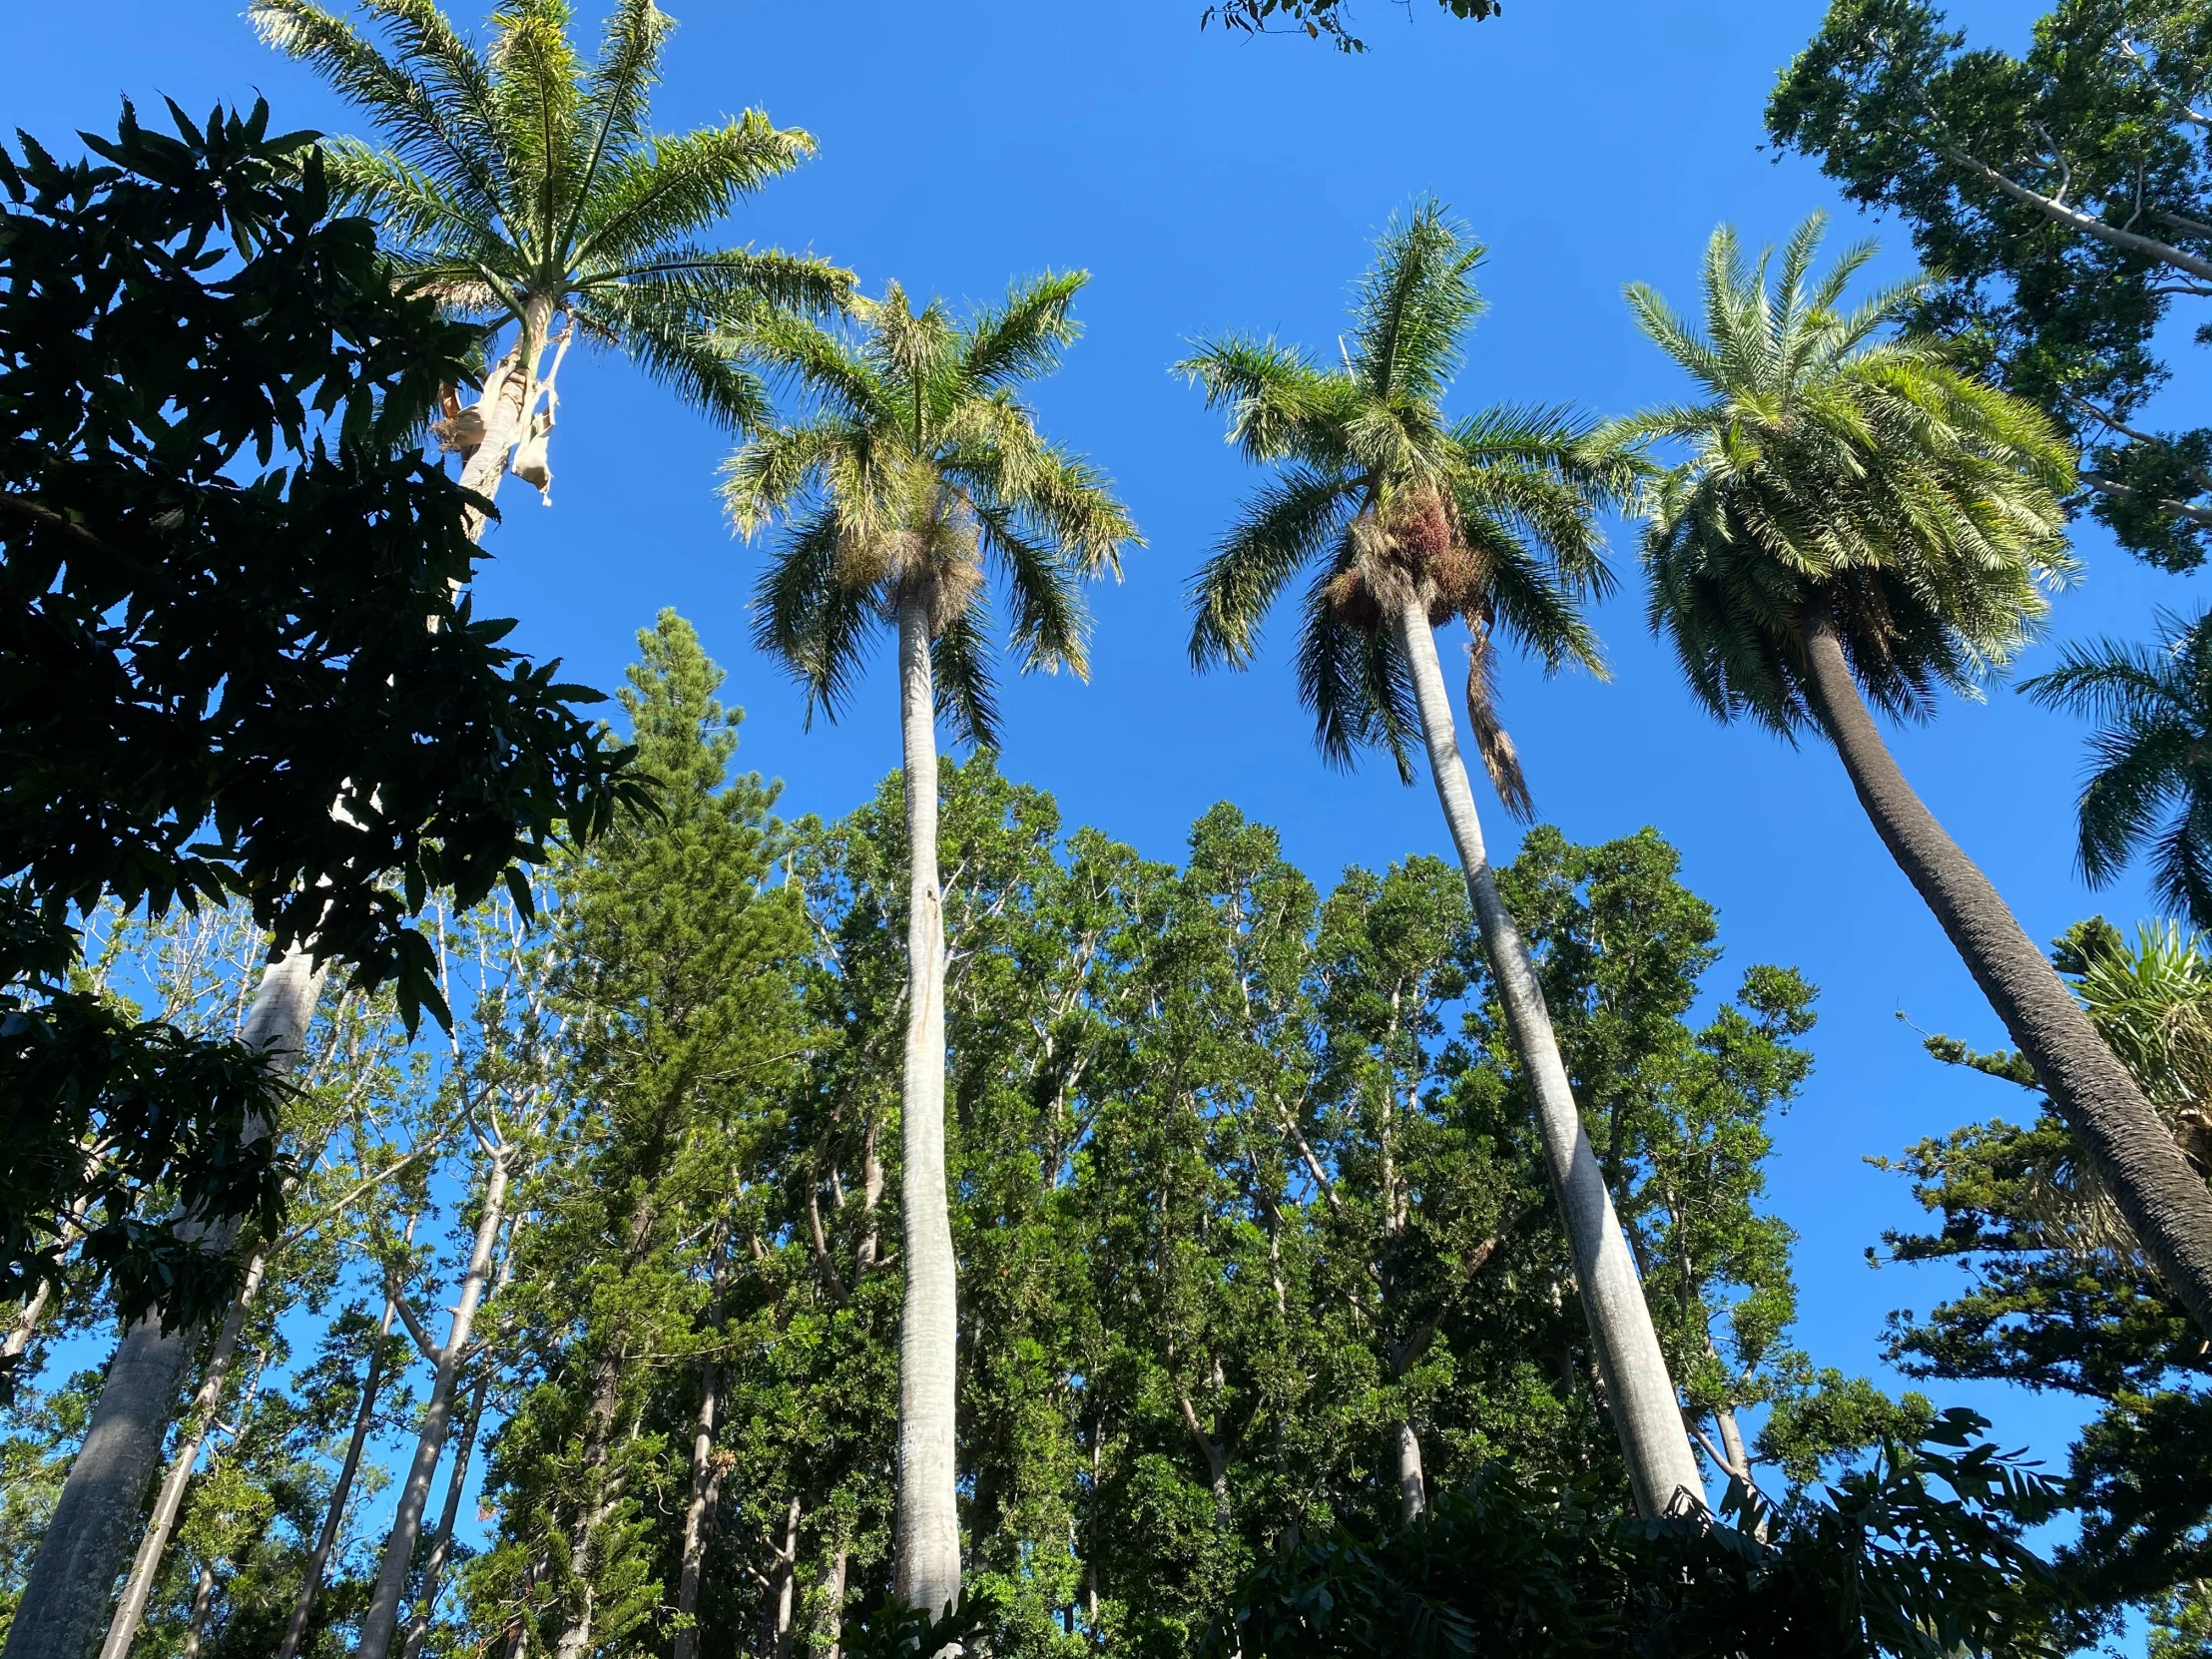 tall palm trees with no leaves stand in the middle of a wooded area